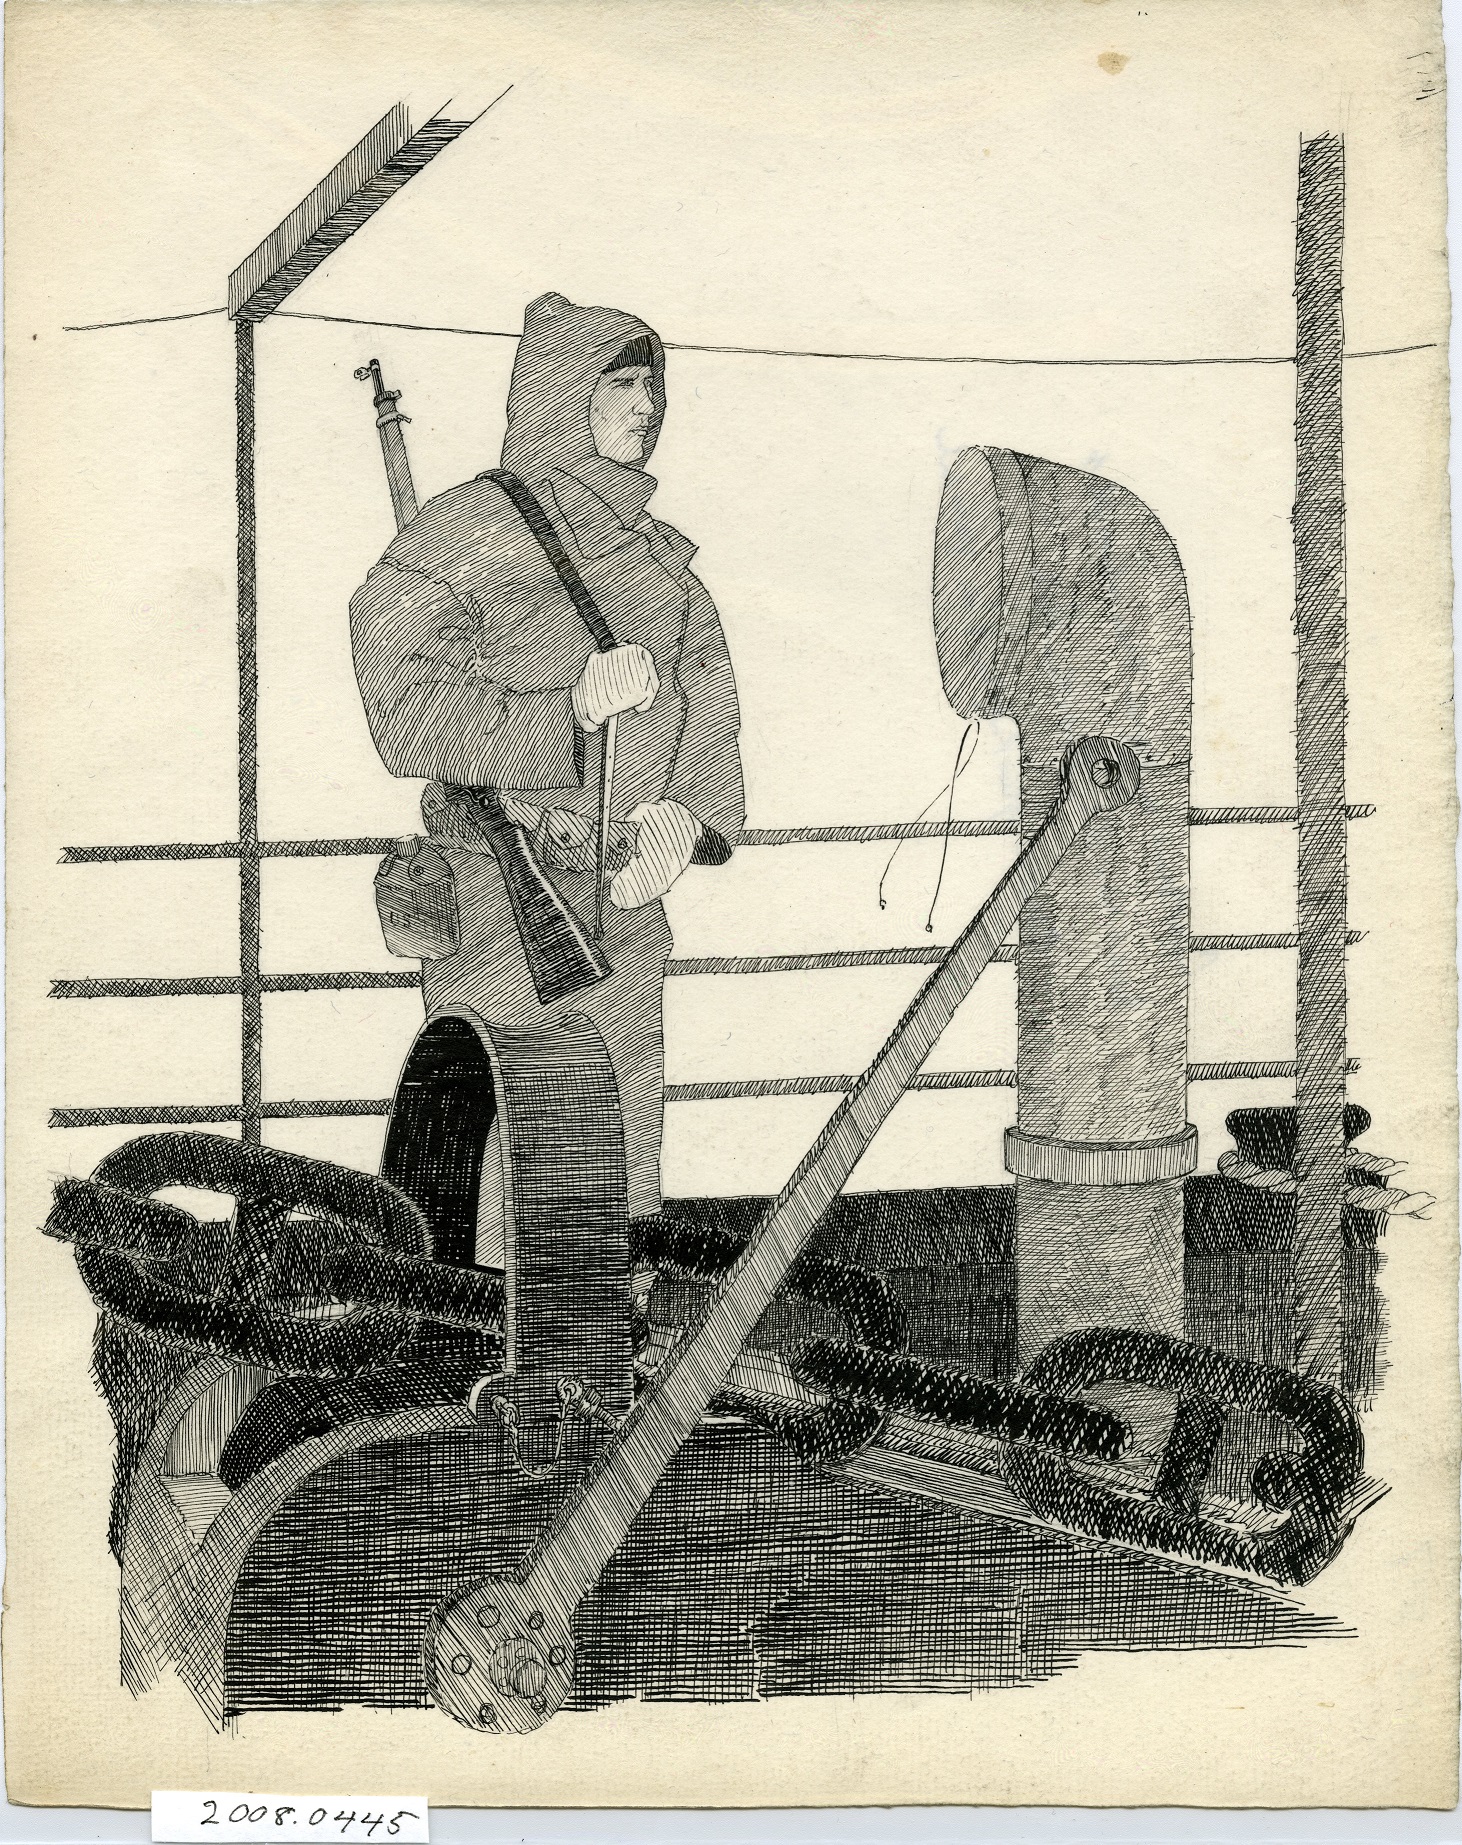 Sketch of a Coast Guard sentry overseeing munitions loading operation on a ship in New York Harbor. (Coast Guard Collection)